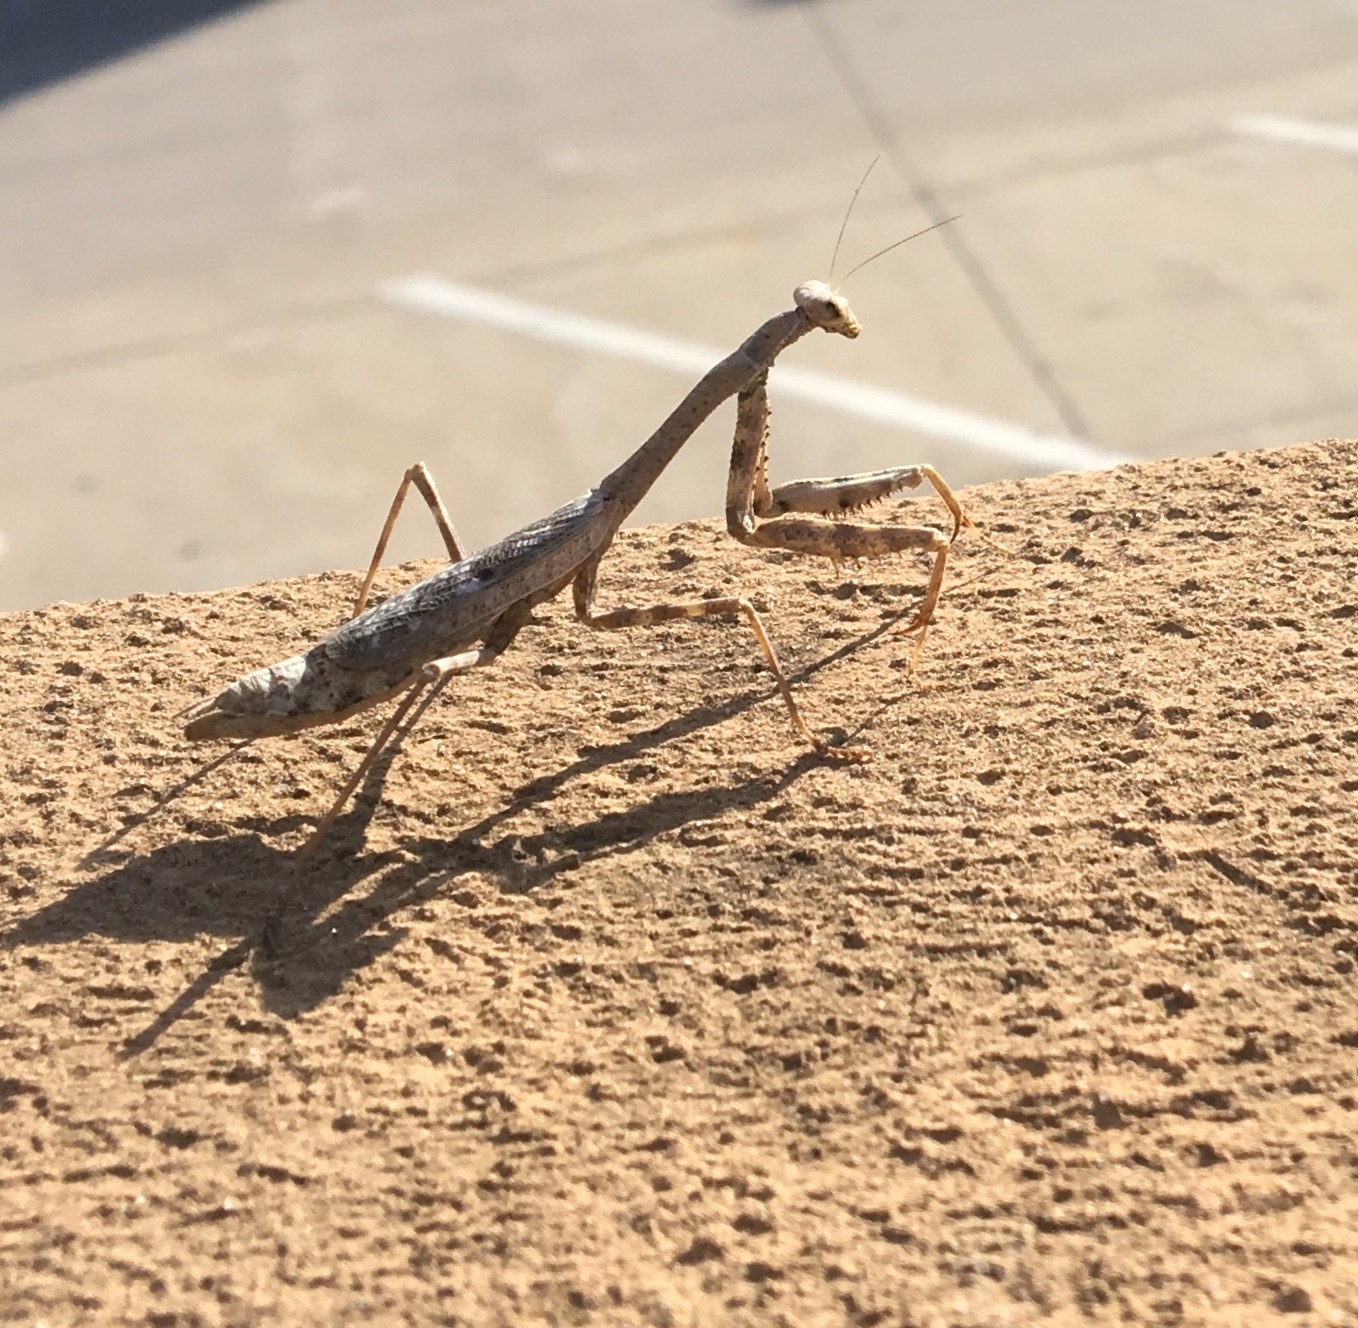 Getting The Bugs Out - Mantis